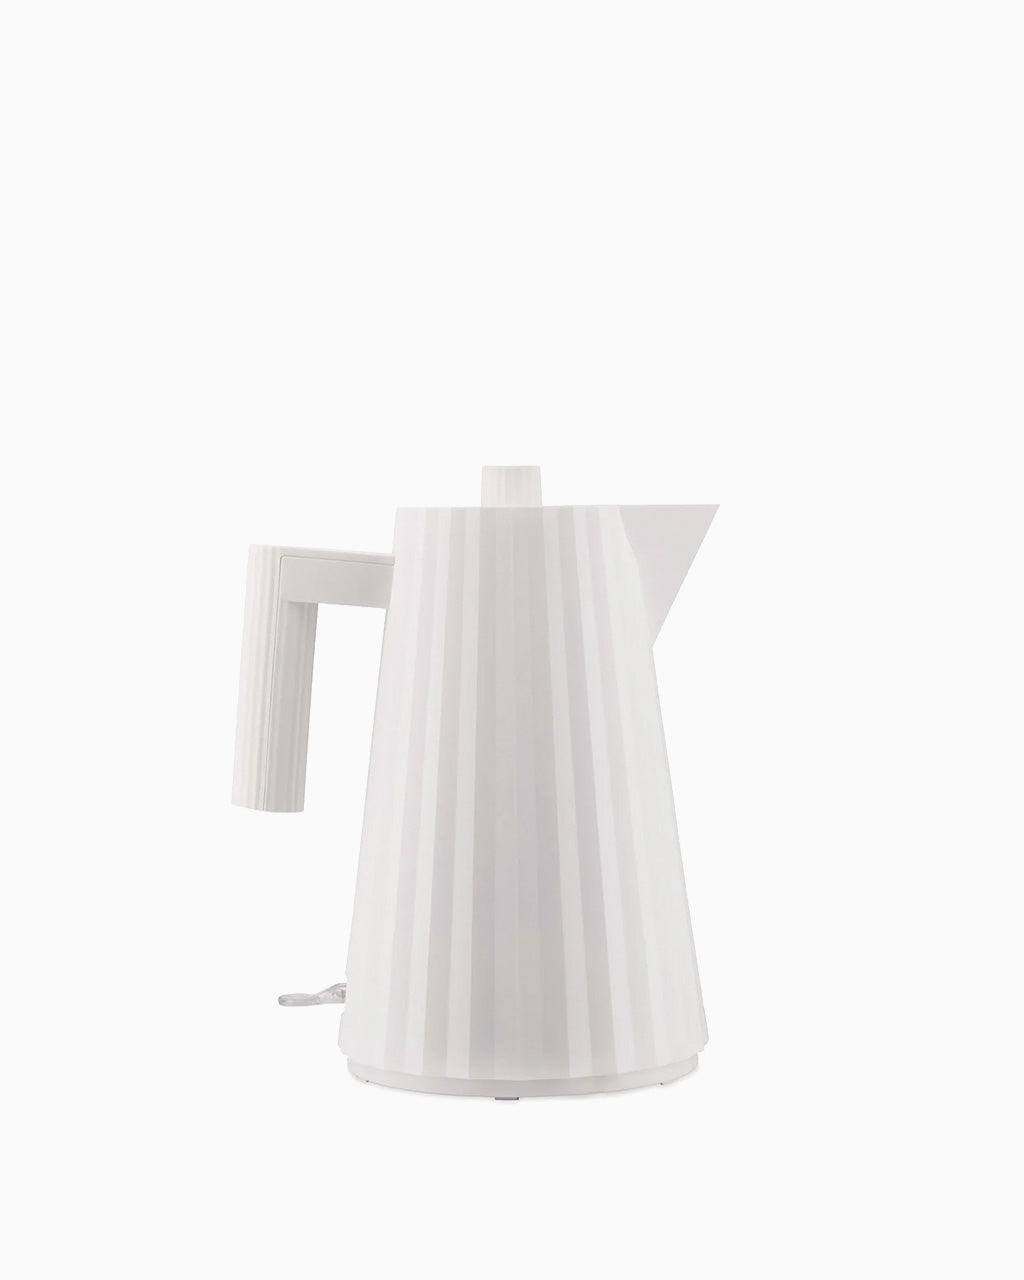 Alessi Plissé Electric Kettle in White